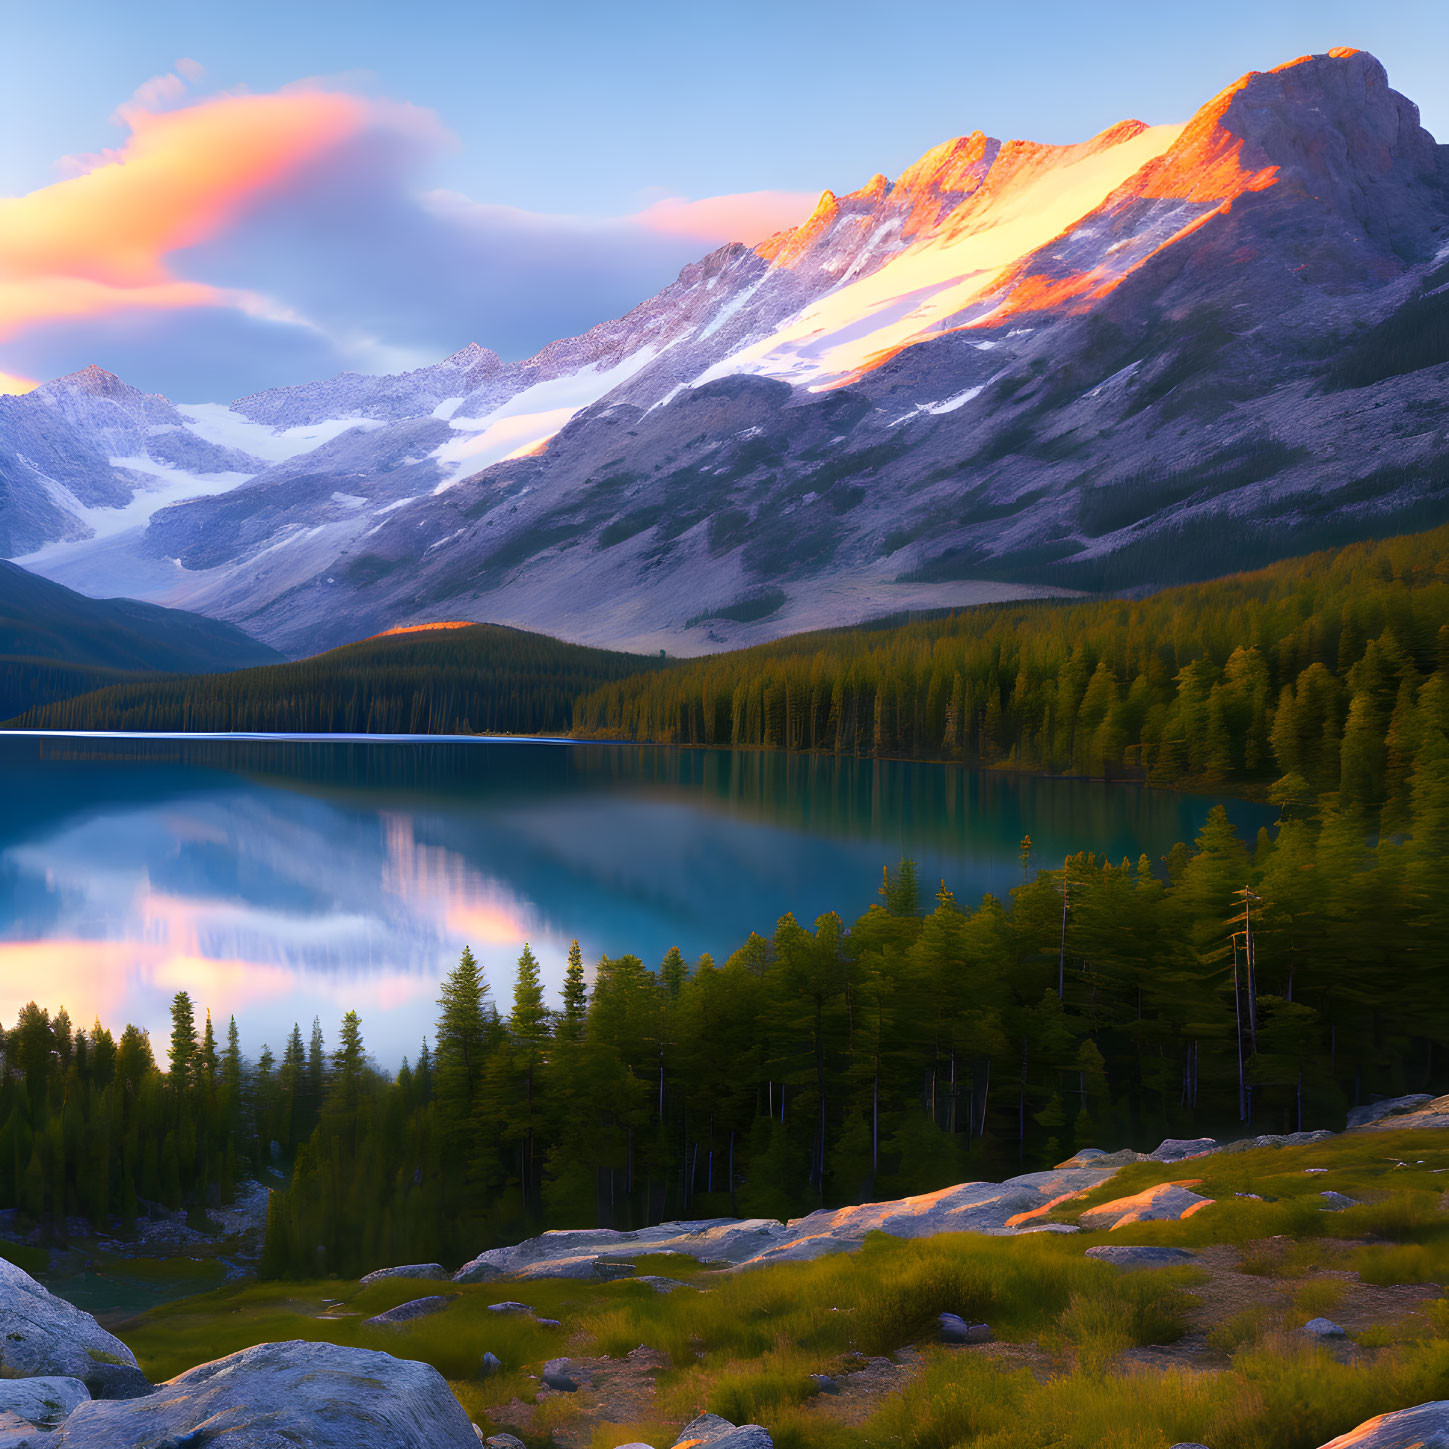 Sunlit Mountain Lake at Sunrise with Forest Surroundings